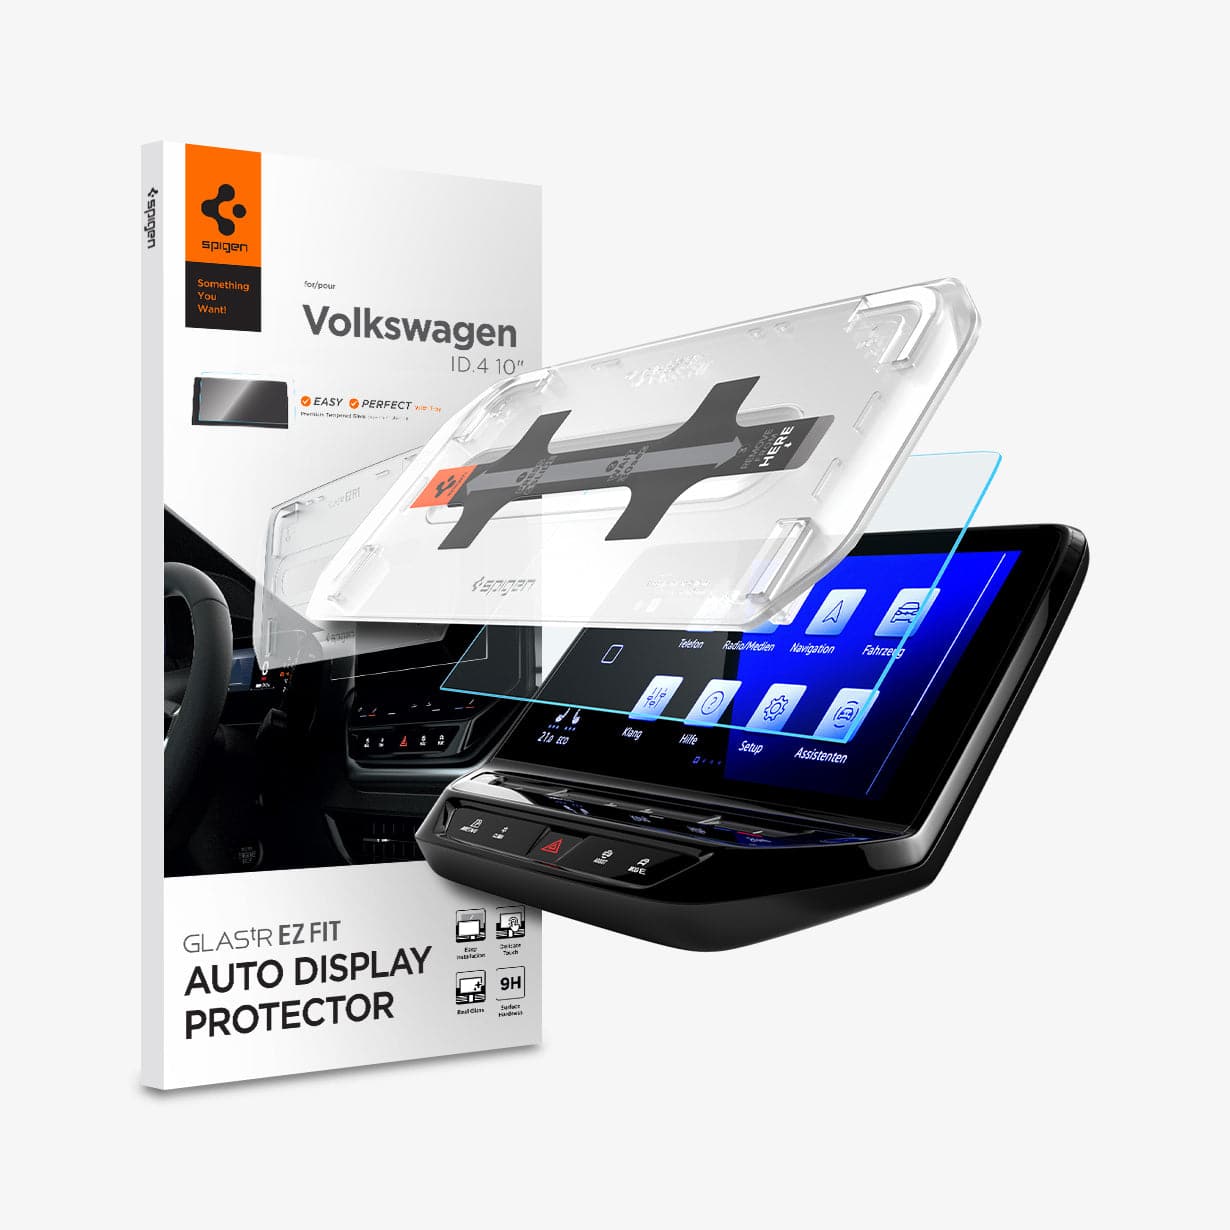 AGL04045 - Volkswagen ID.4 10" Screen Protector EZ FIT GLAS.tR Anti-Glare showing the touch screen display, screen protector, ez fit tray and packaging